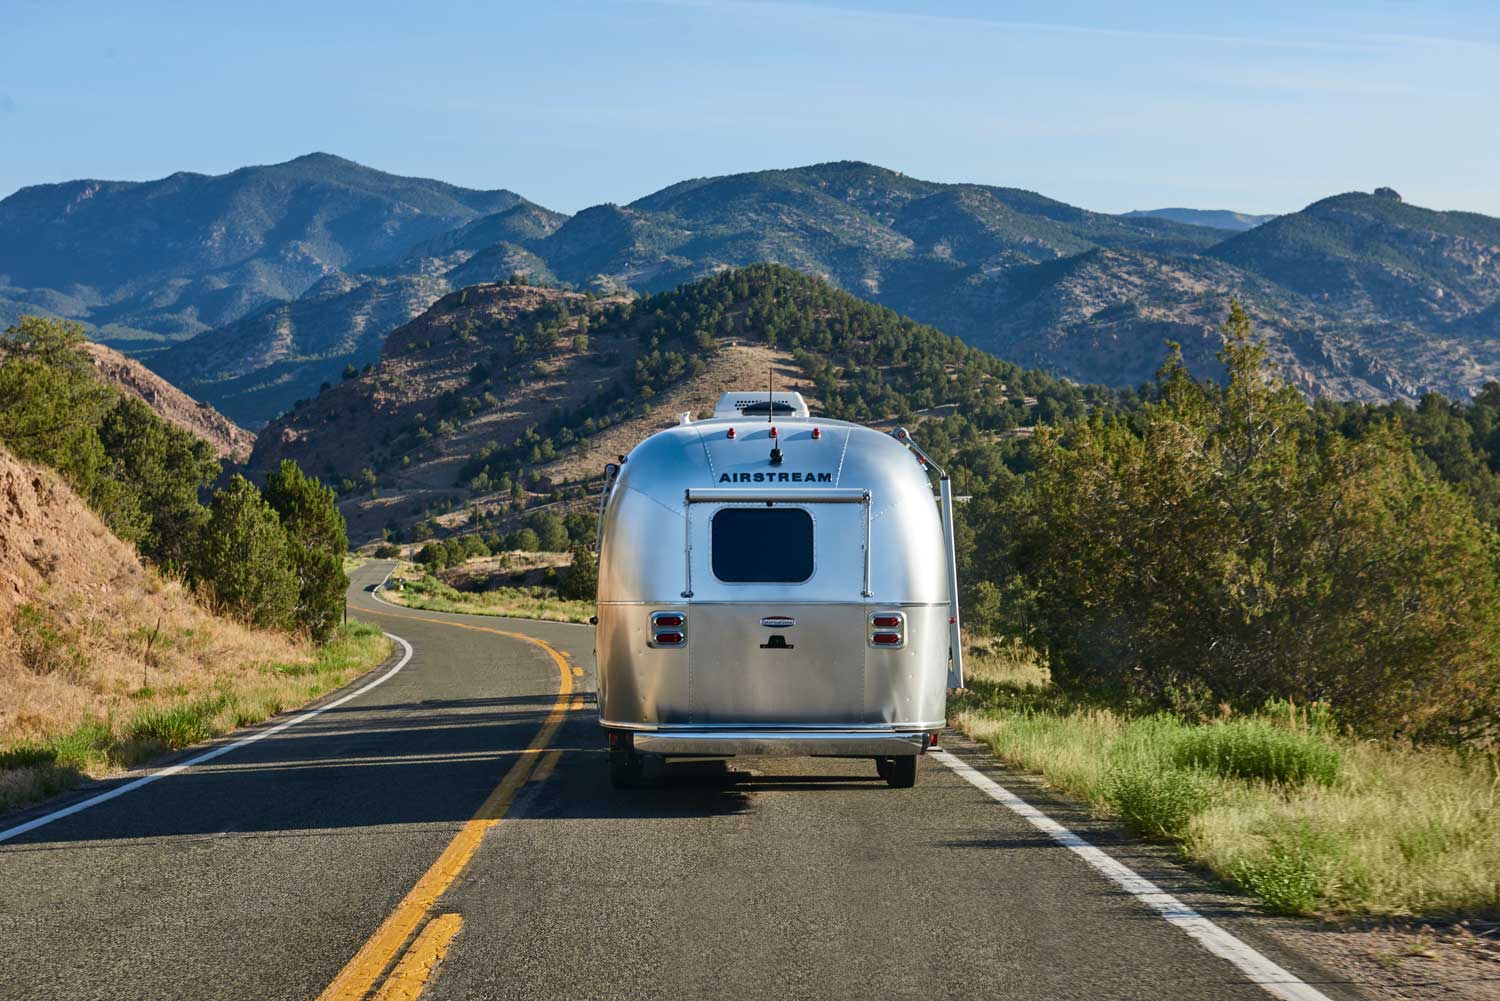 Airstream on a mountain road